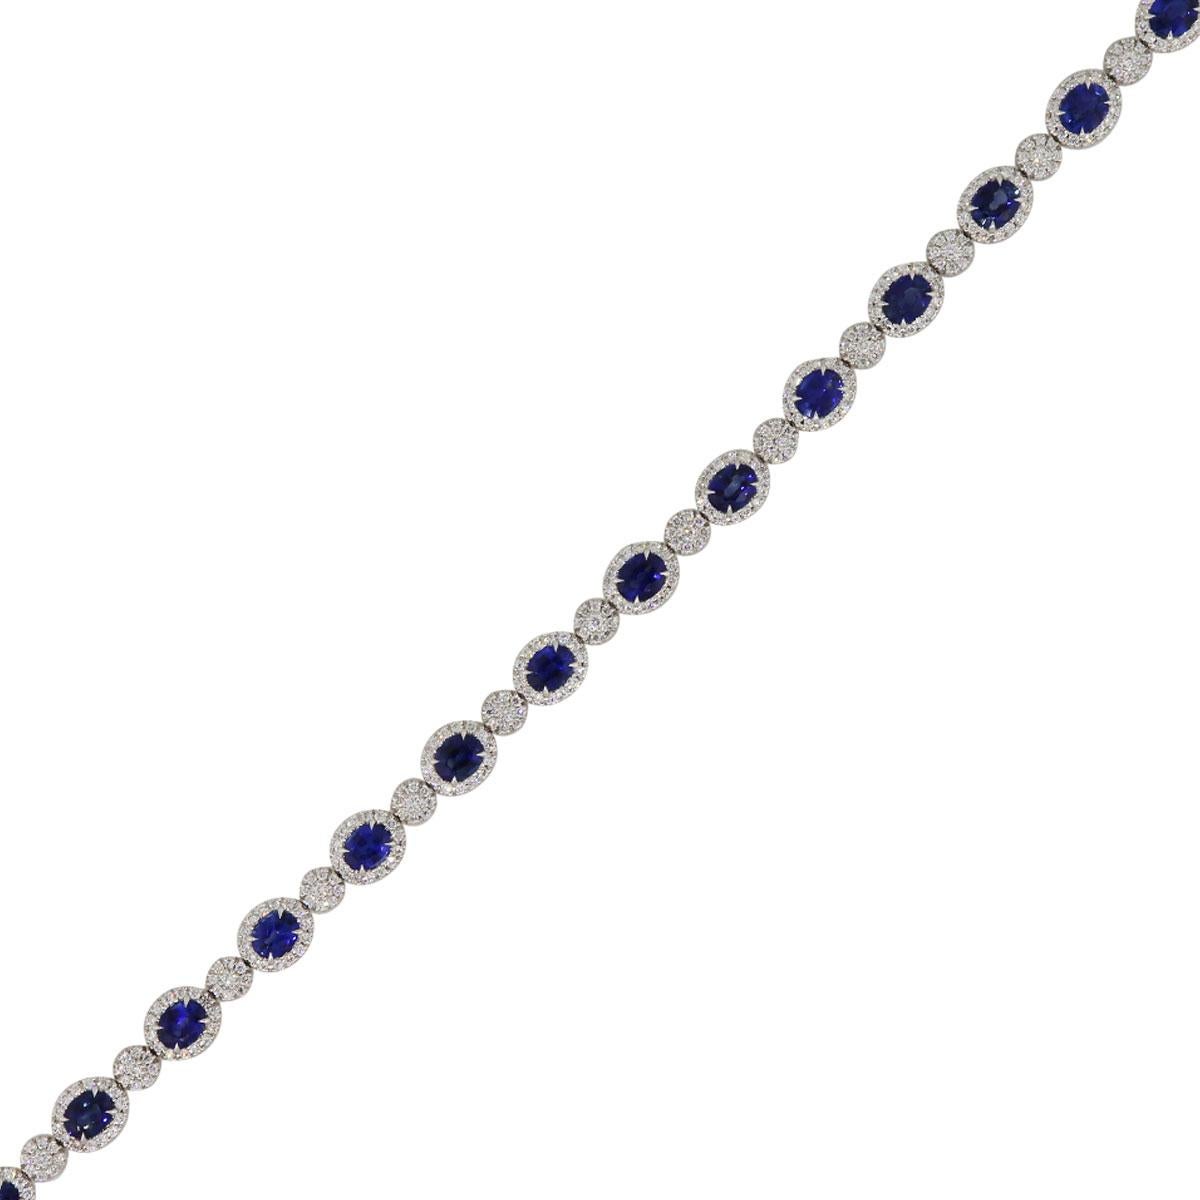 Material: 18k White Gold
Diamond Details: Approximately 1.83ctw of round brilliant diamonds. Diamonds are G/H in color and SI in clarity
Gemstone Details: Approximately 6.47ctw of oval shape sapphires
Wrist size: Will fit up to a 7″